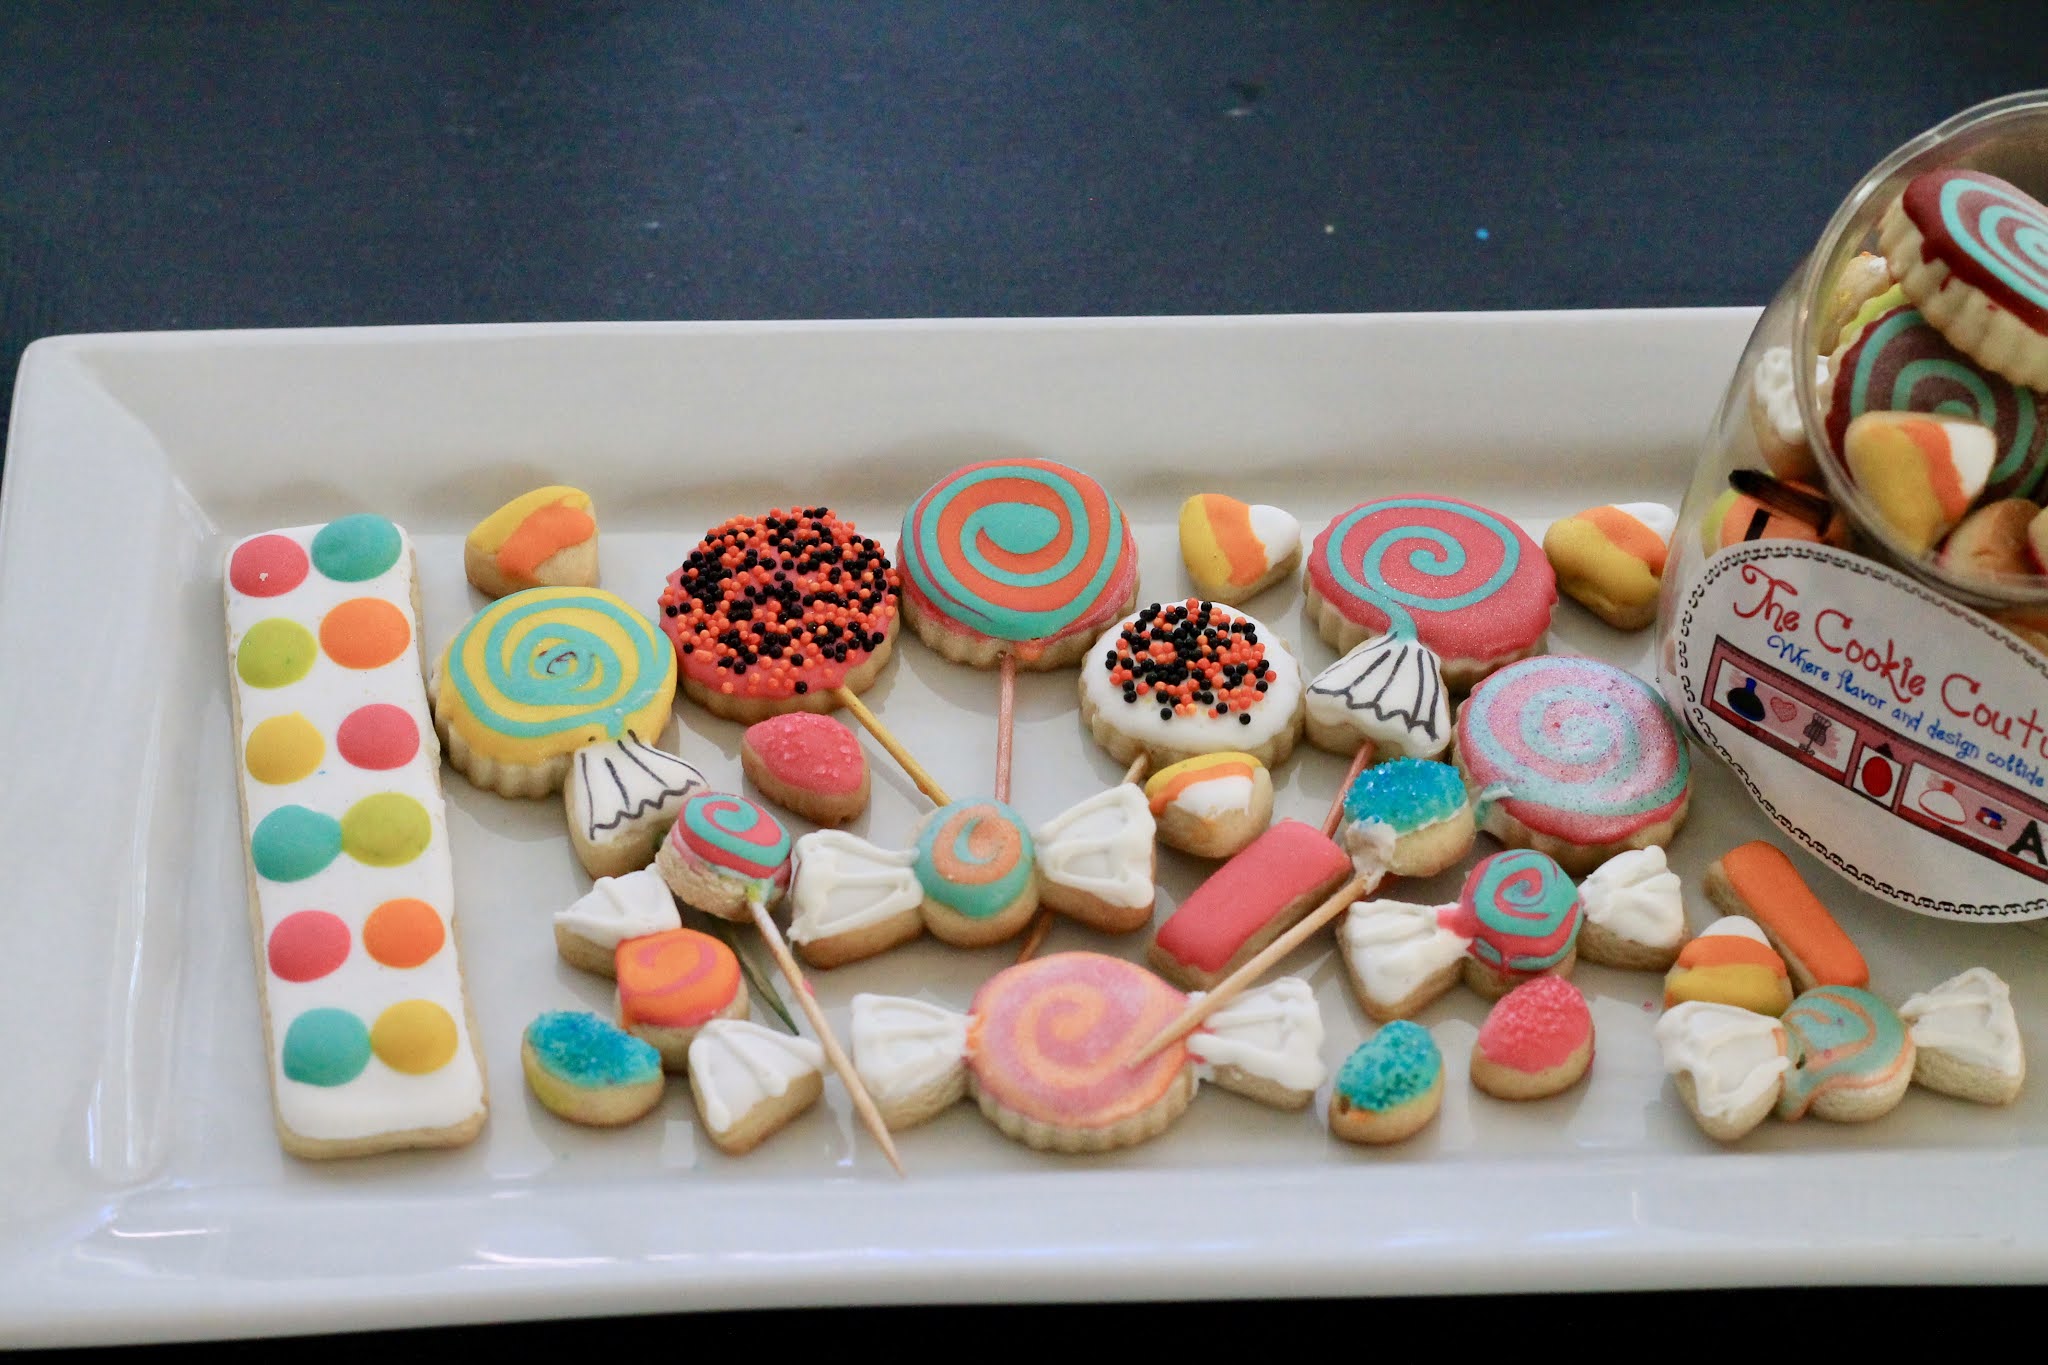 How to Make Monogrammed Sugar Cookies Without A Projector - Goodie